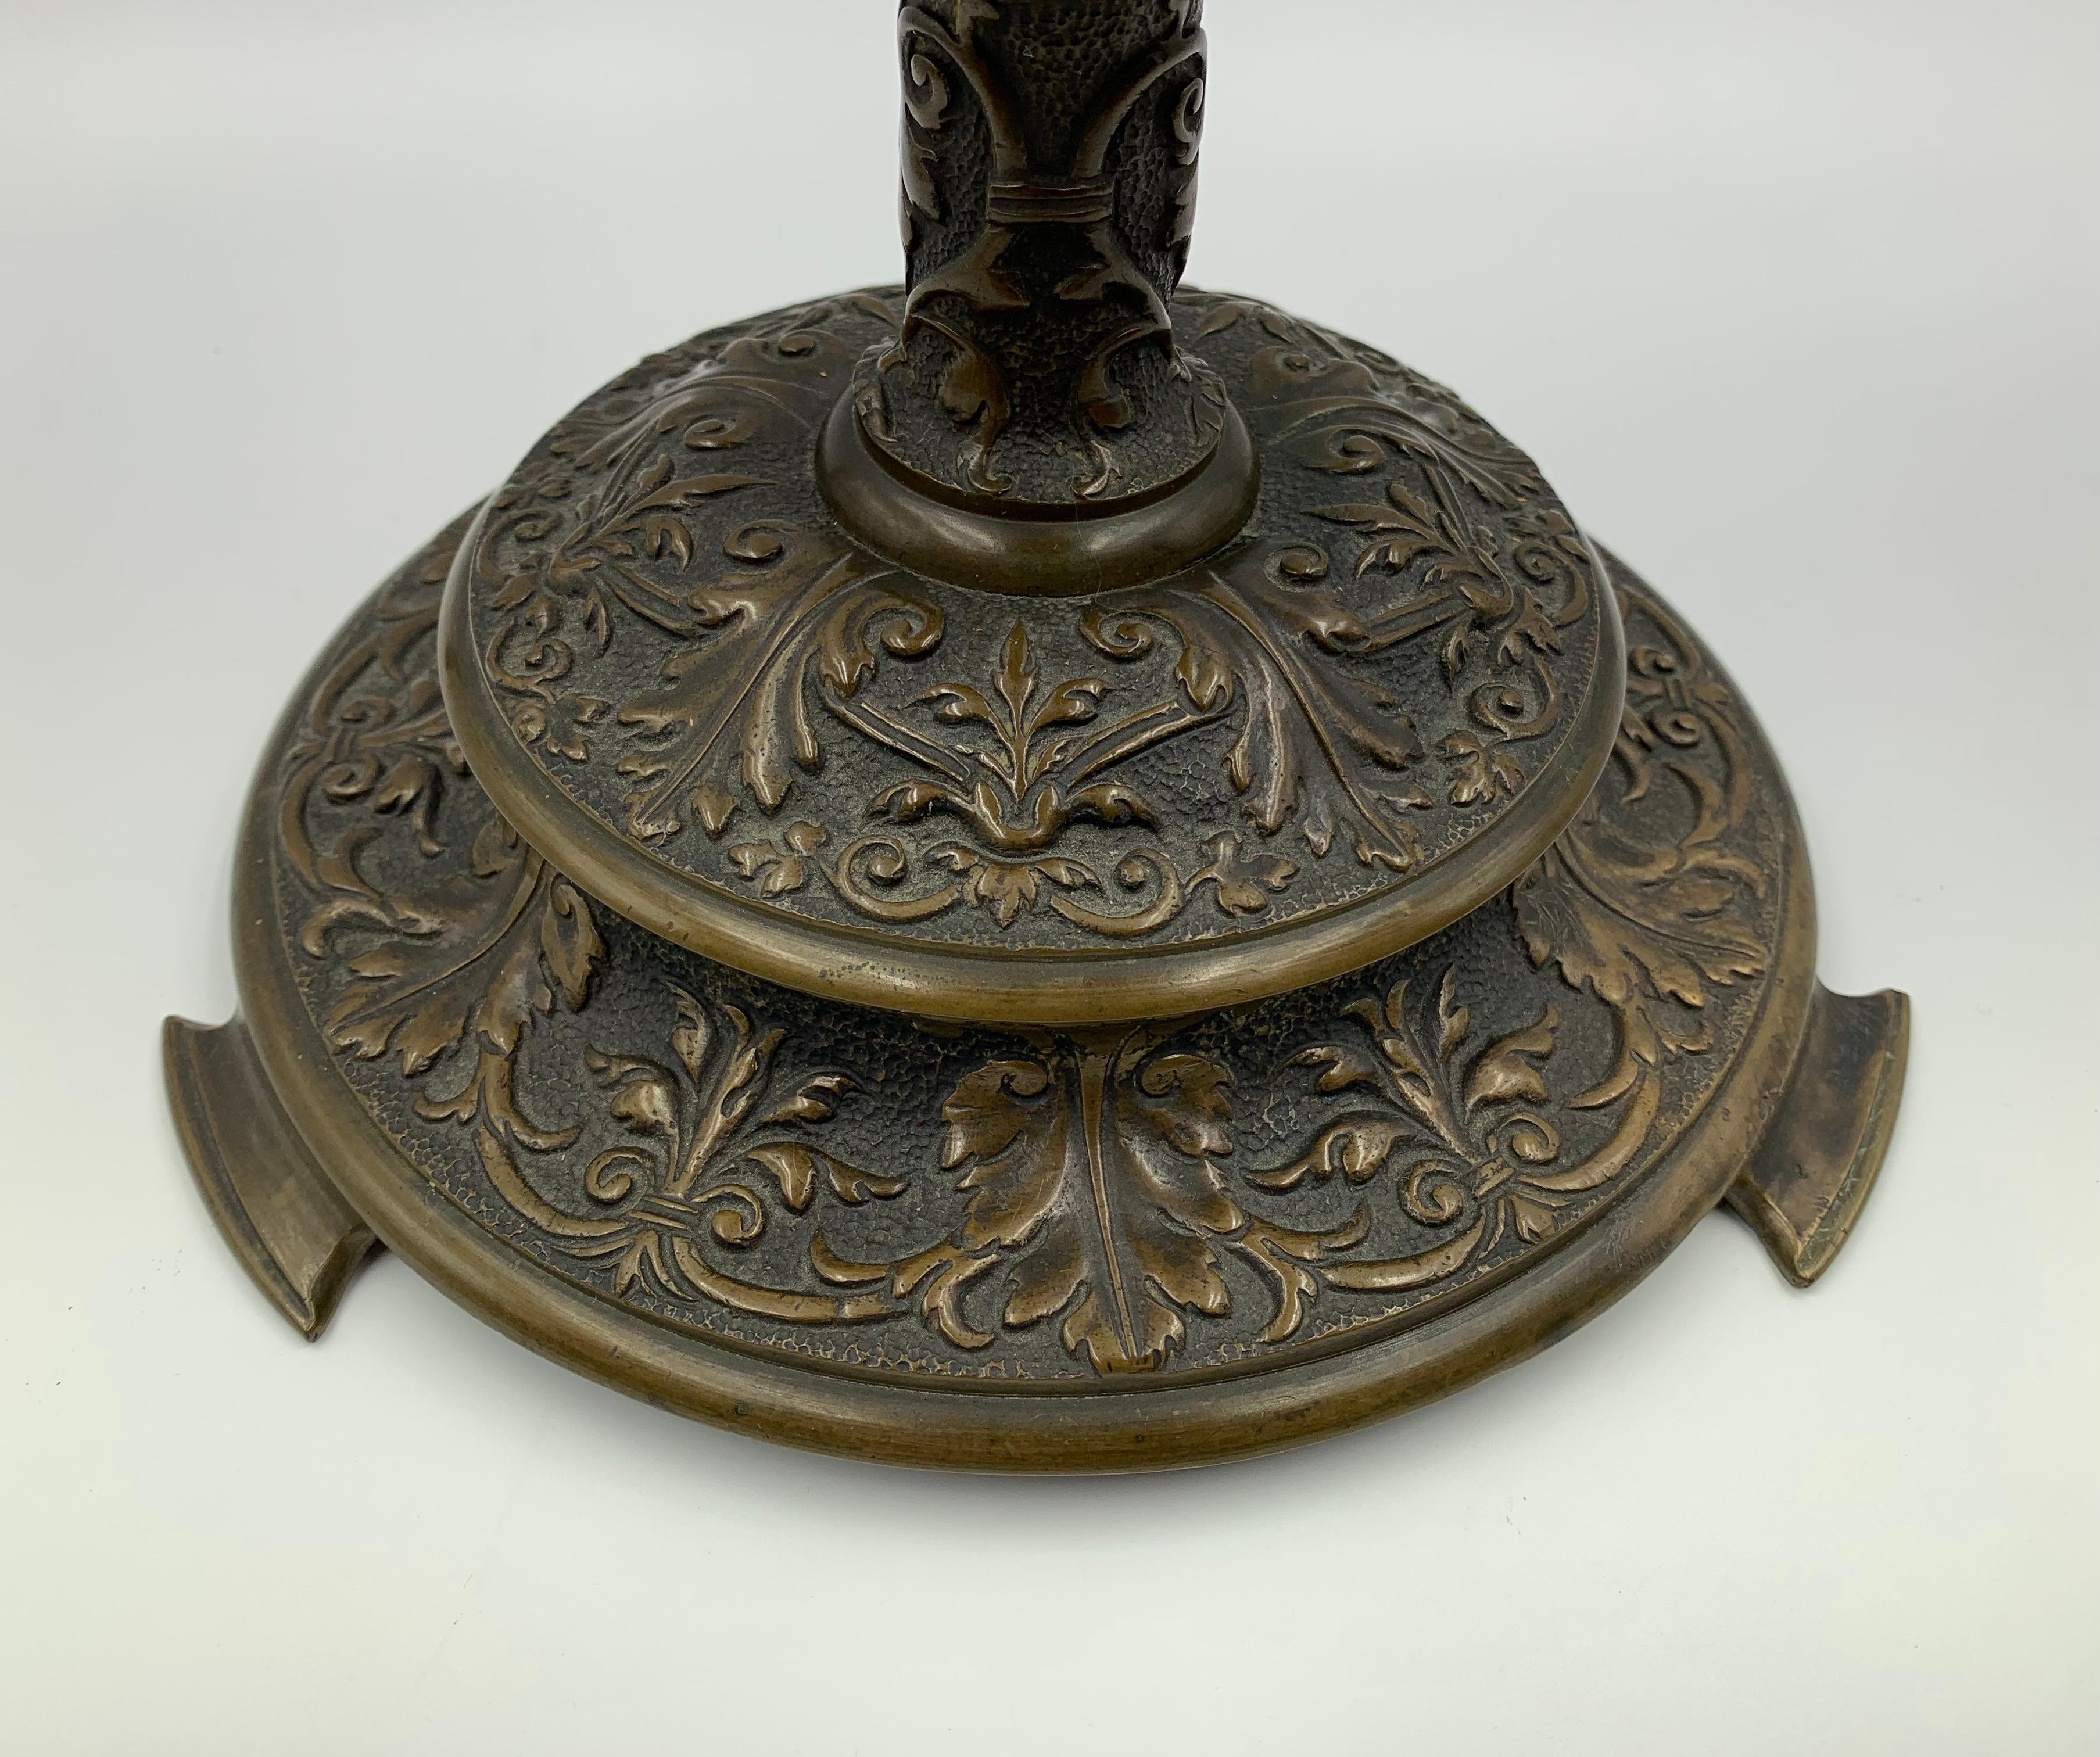 Fine pair of Renaissance style patinated bronze candle holders in the manner of Edward F. Caldwell, late 19th century.
Original medium brown patina with beautiful age appropriate sheen, excellent details. The capitals decorated with urn and foliate